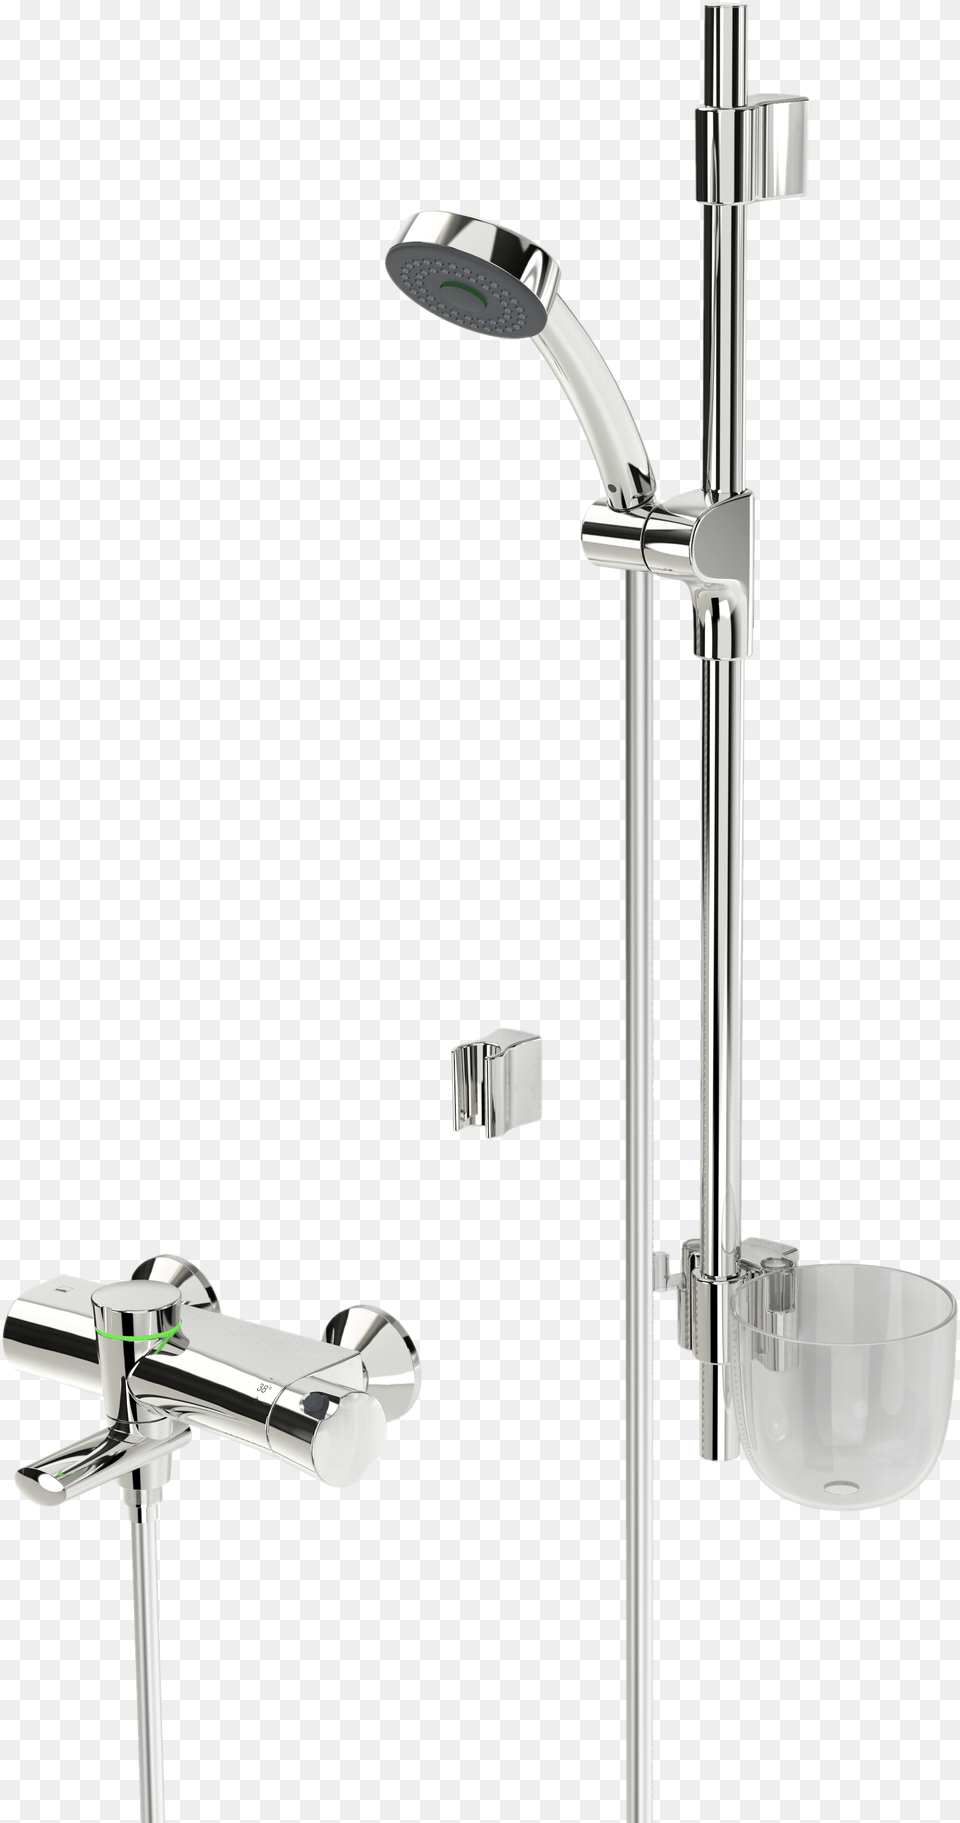 Oras Eterna Bath And Shower Faucet With Shower Bateria Wannowa Z Prysznicem, Indoors, Bathroom, Room, Shower Faucet Png